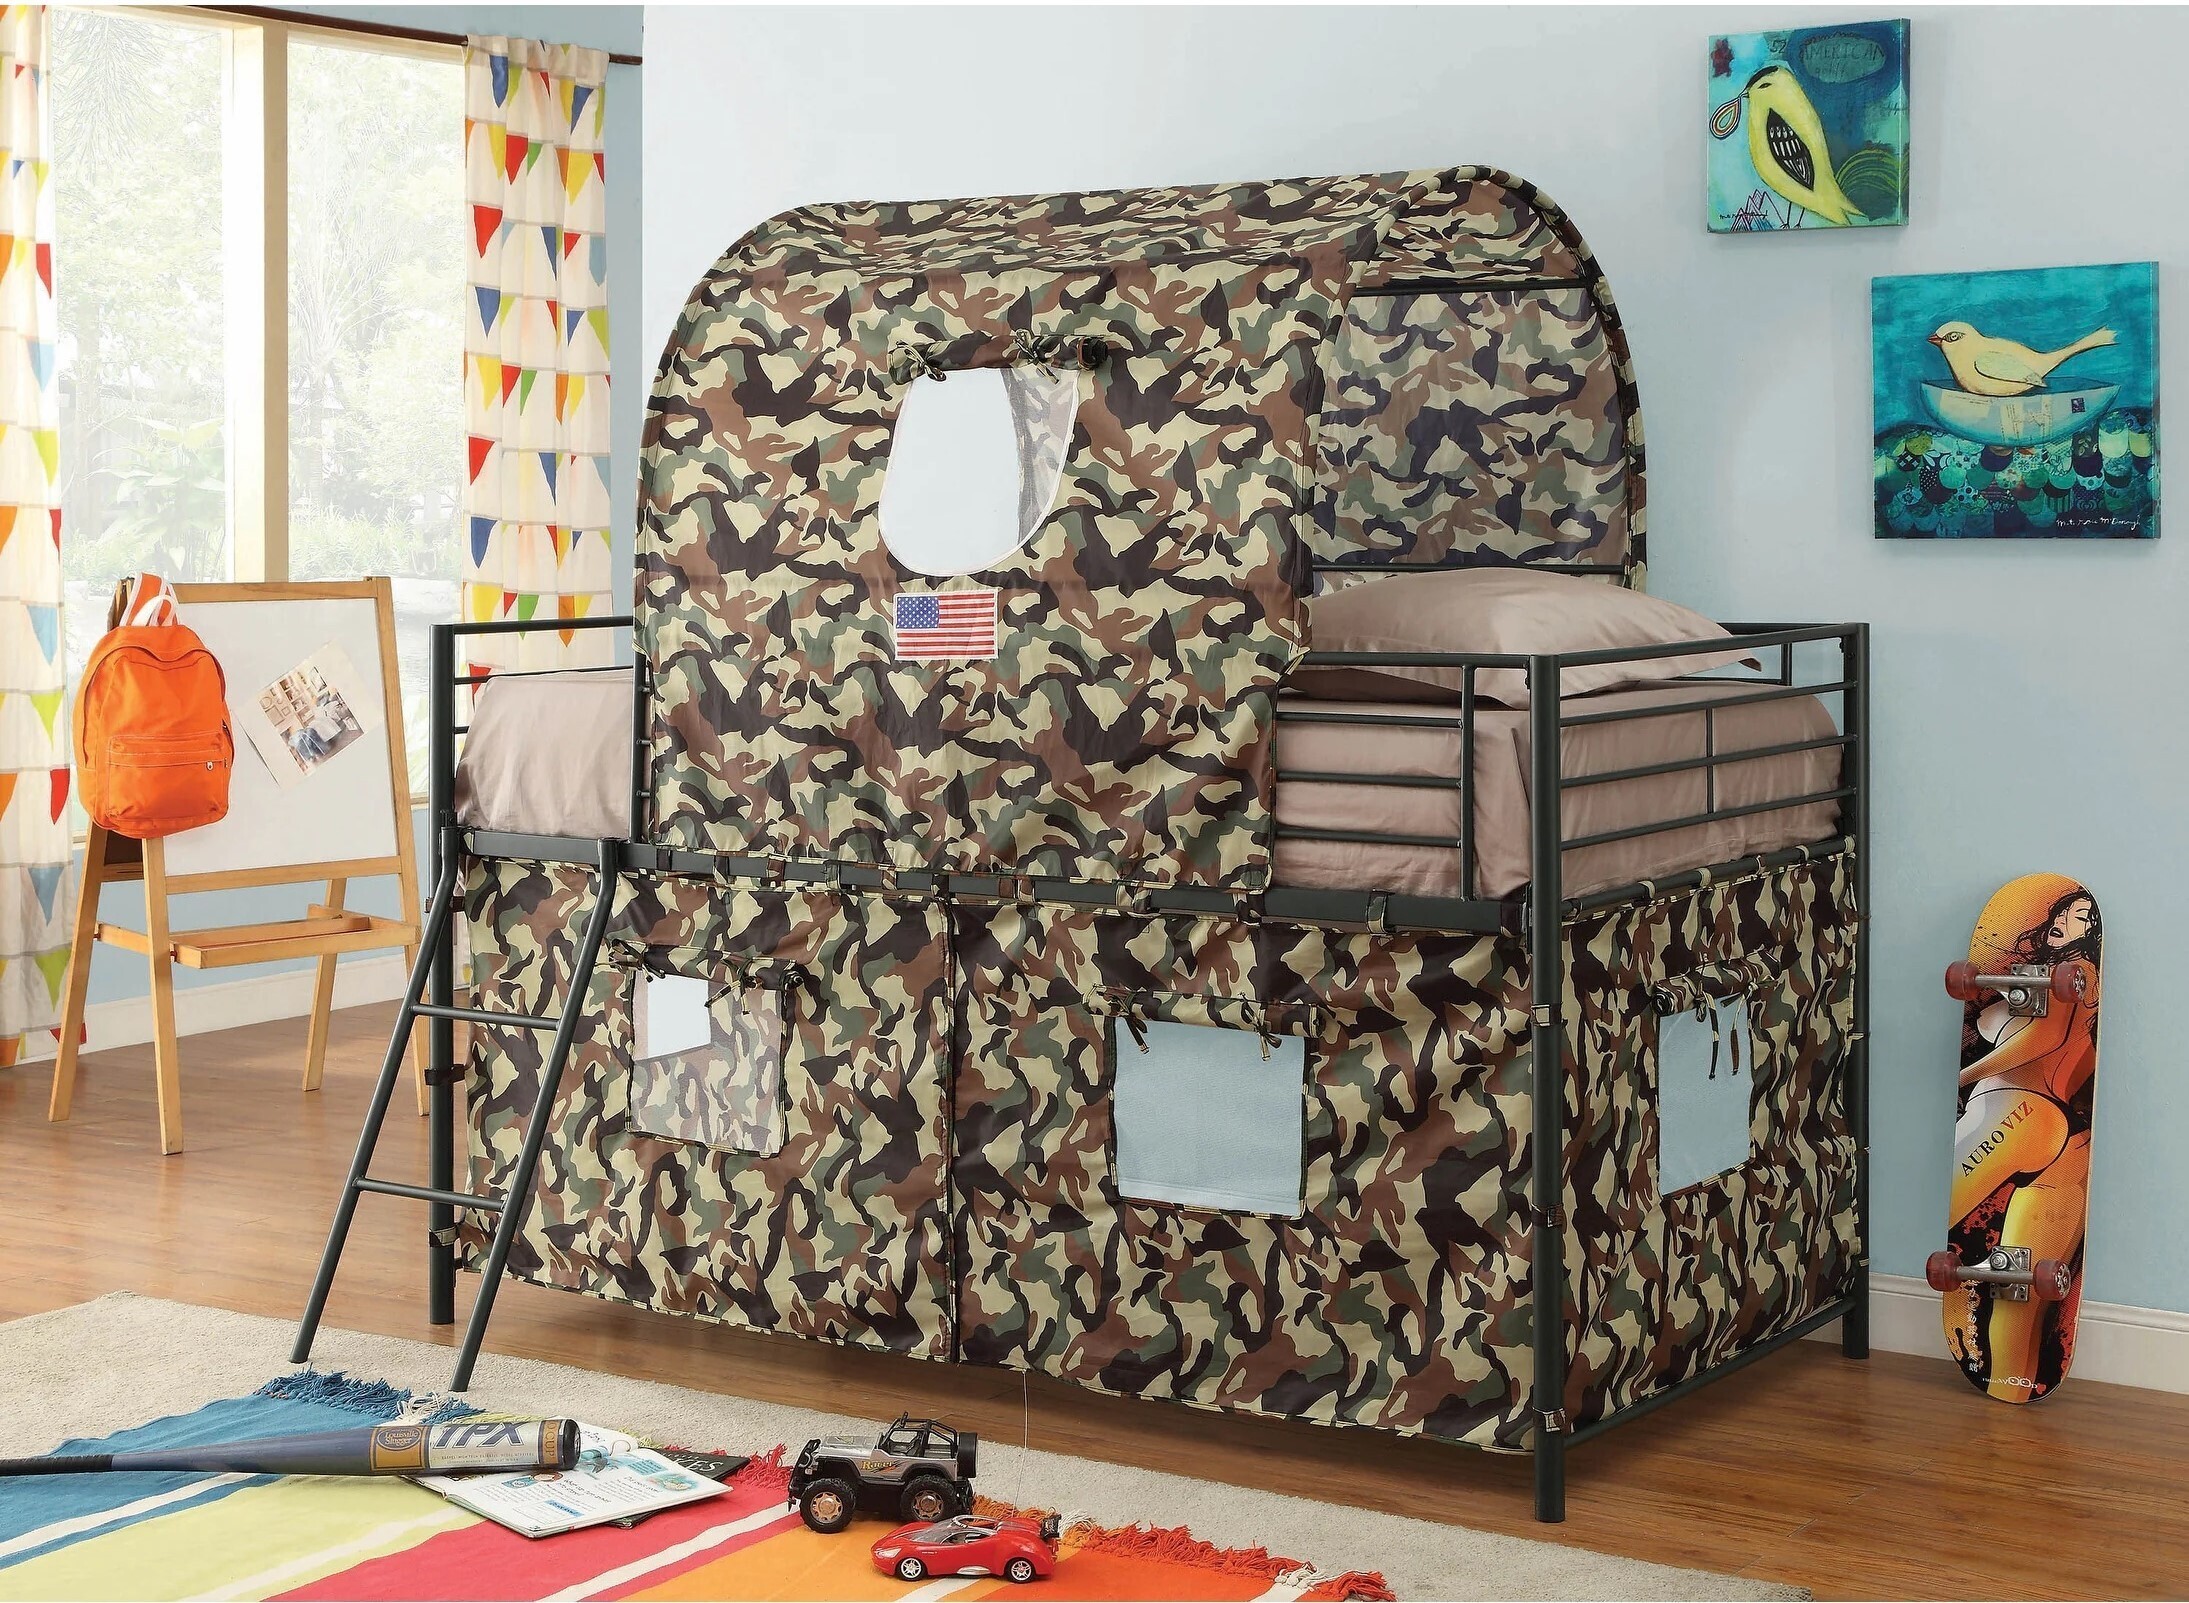 Bunk bed tents that offer fun for both the bottom and top bunks